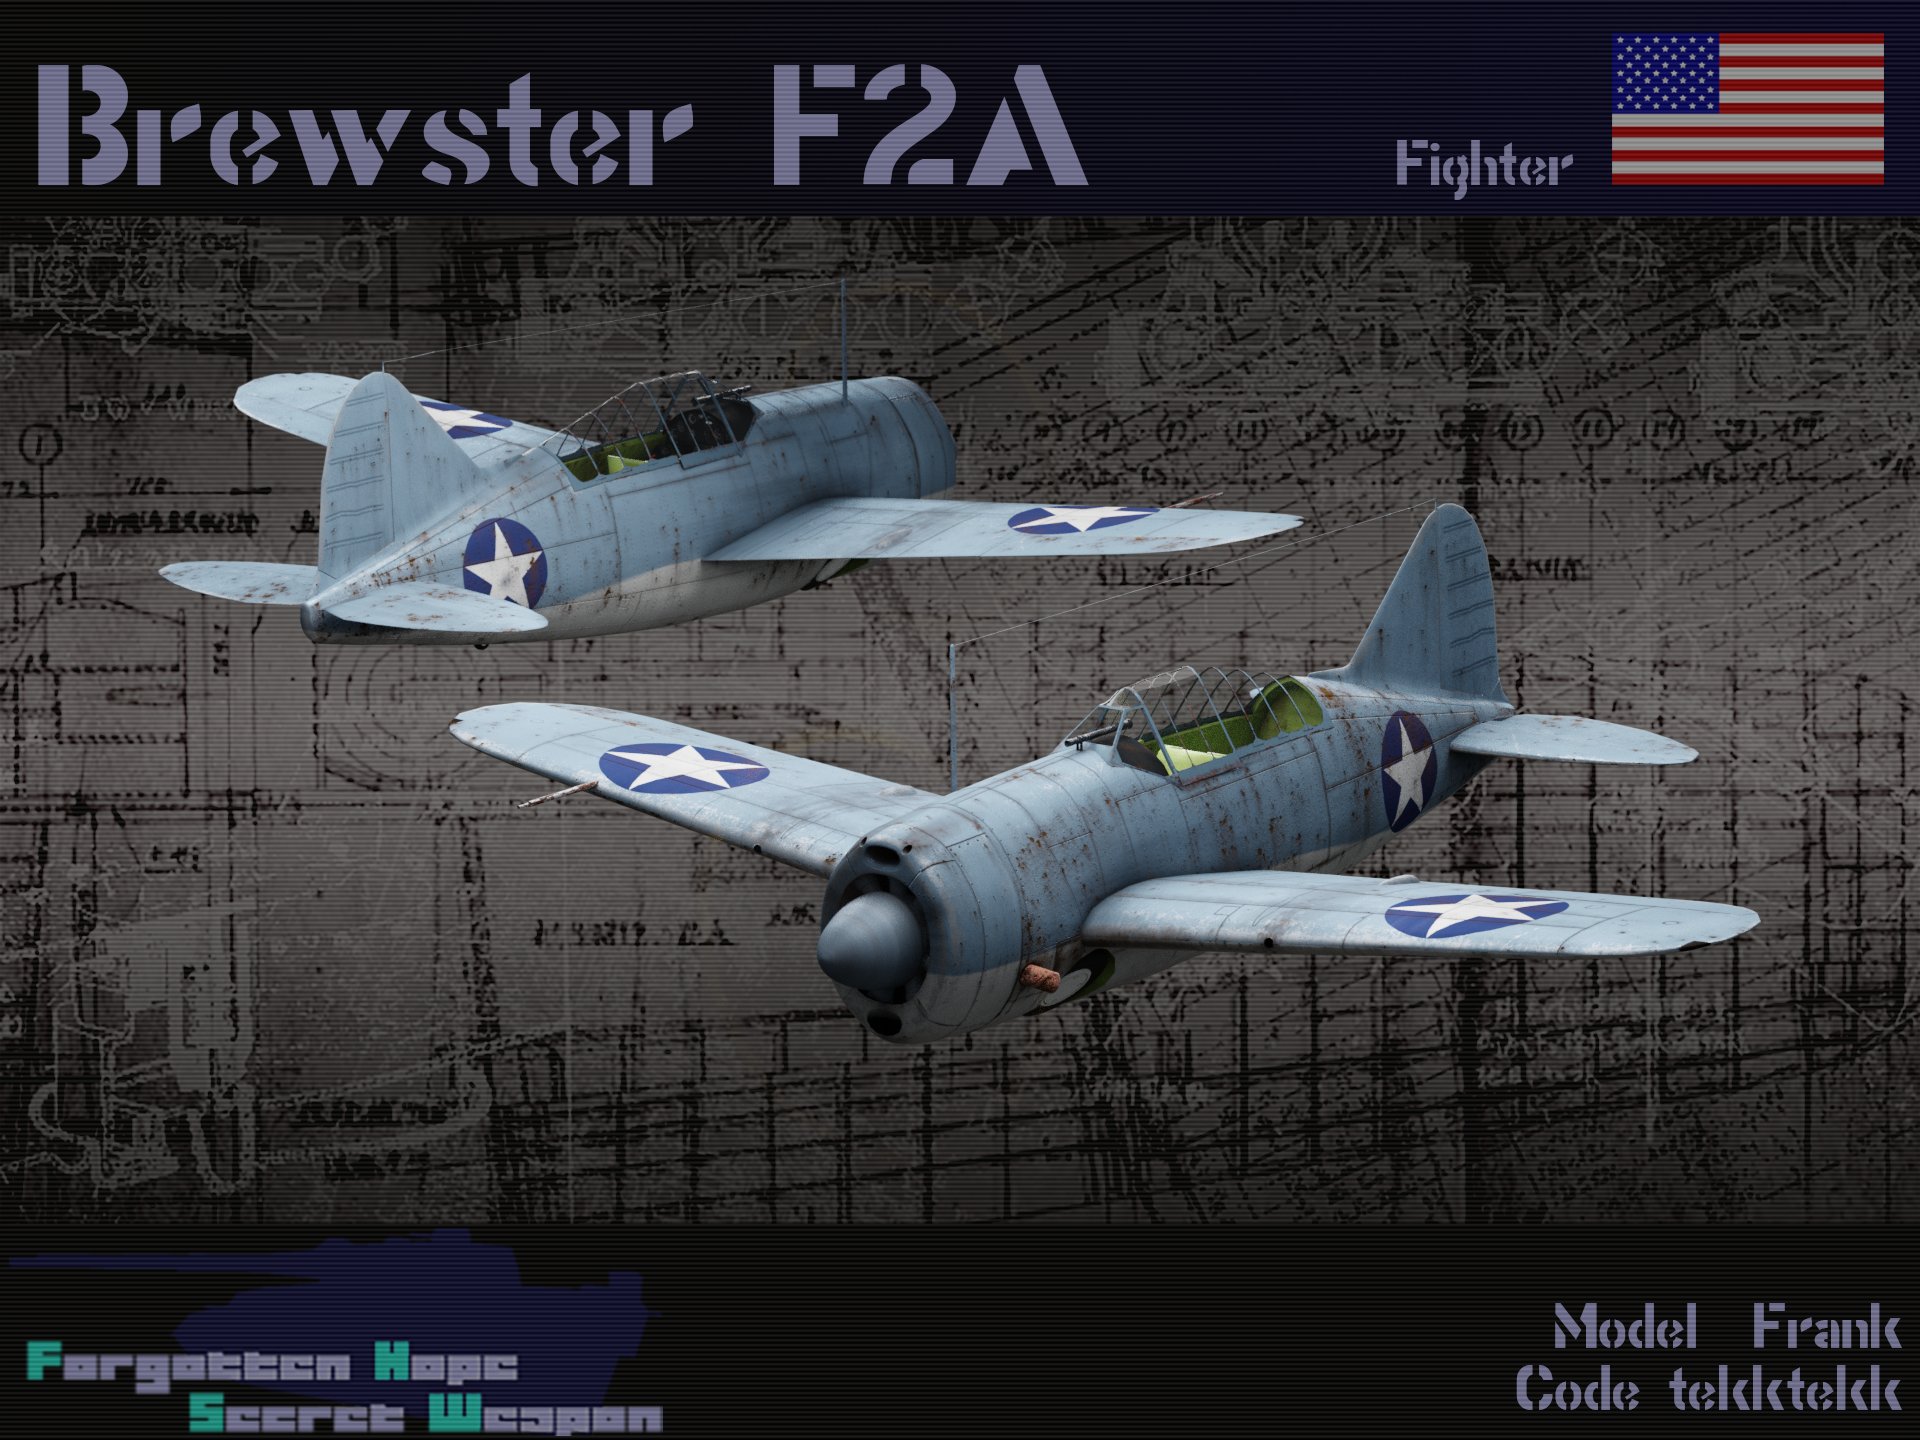 Brewster F2A Buffalo Wallpapers